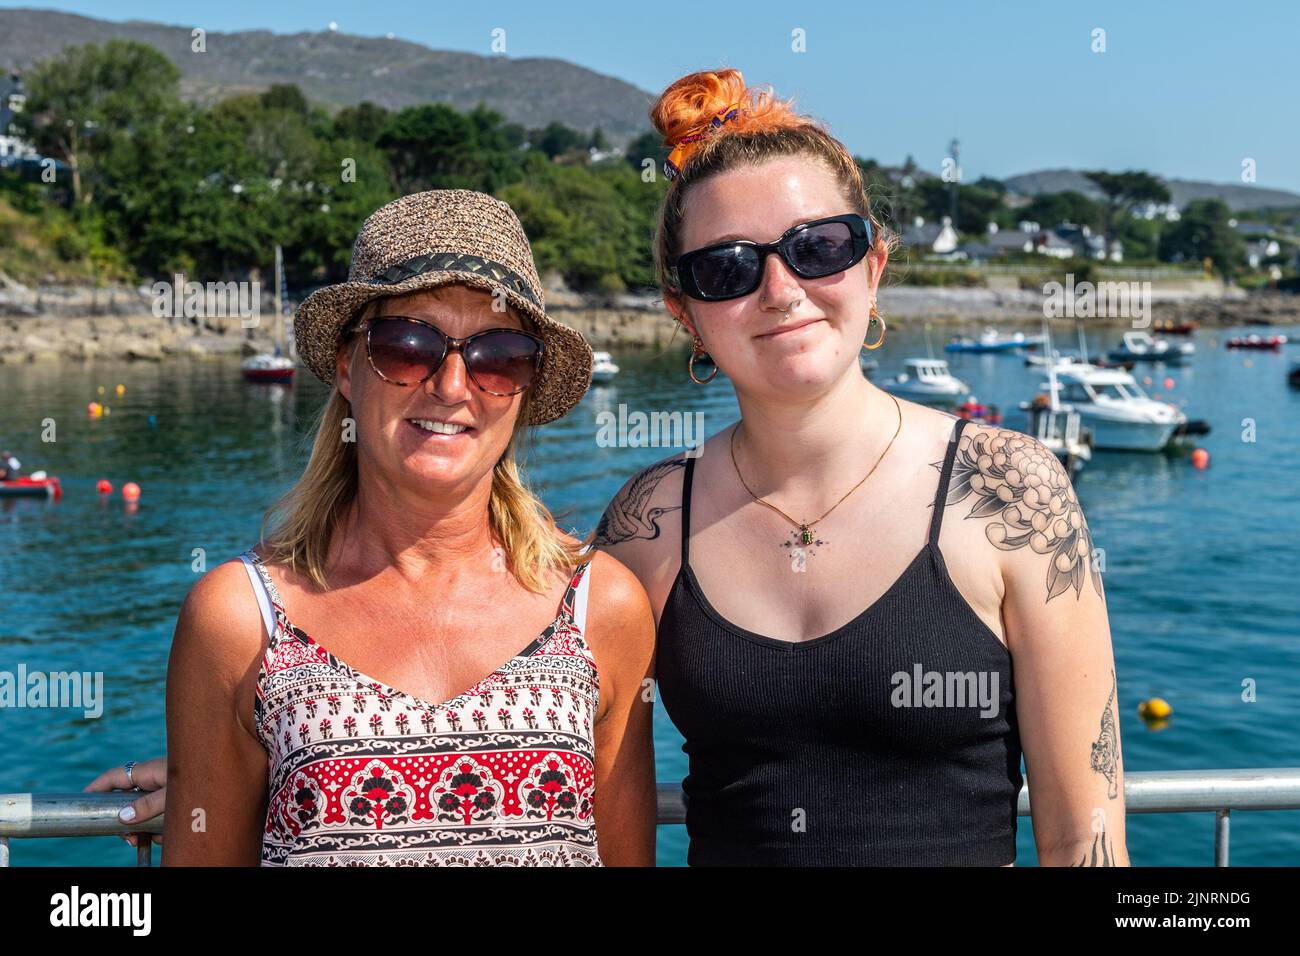 Schull, West Cork, Ireland. 13th Aug, 2022. The 2022 Irish Coastal Rowing Championships is taking place this weekend in Schull, West Cork. A total of 290 crews from different clubs are taking part in the event which finishes Sunday evening. Enjoying the event were Maggie and Zoe Fleury from Schull. Credit: AG News/Alamy Live News Stock Photo